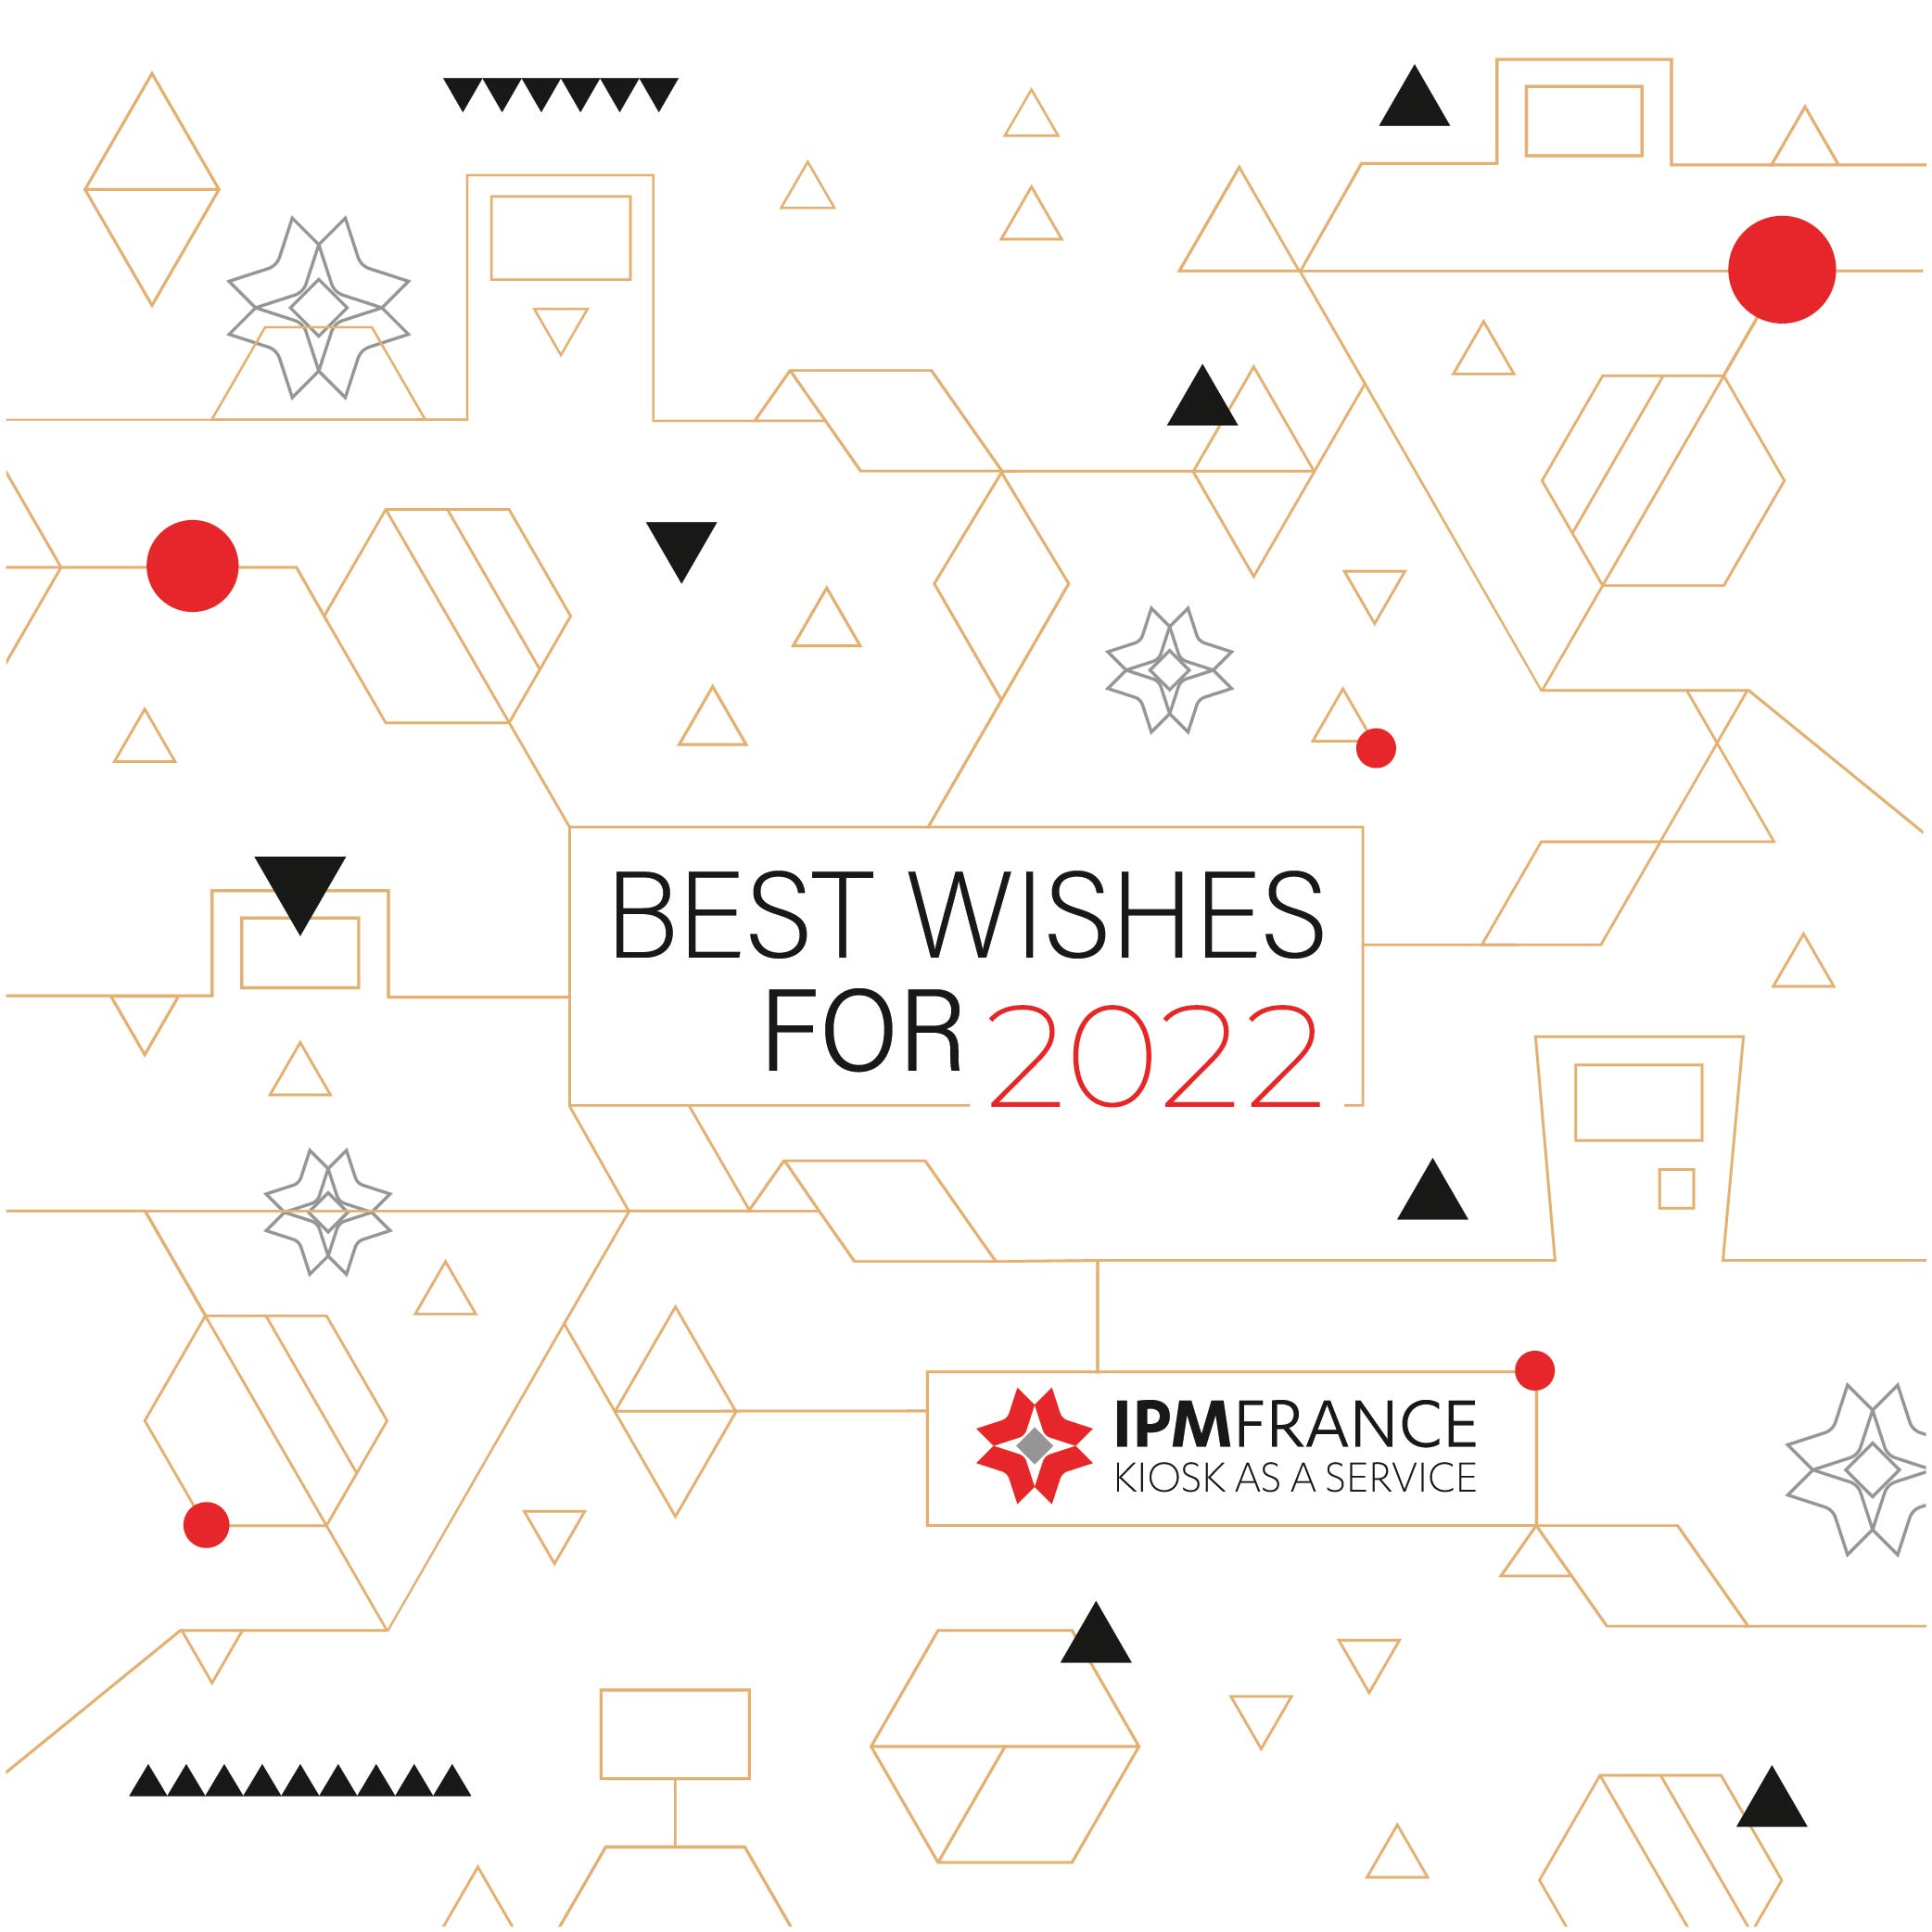 Best wishes for 2022-IPM France-01